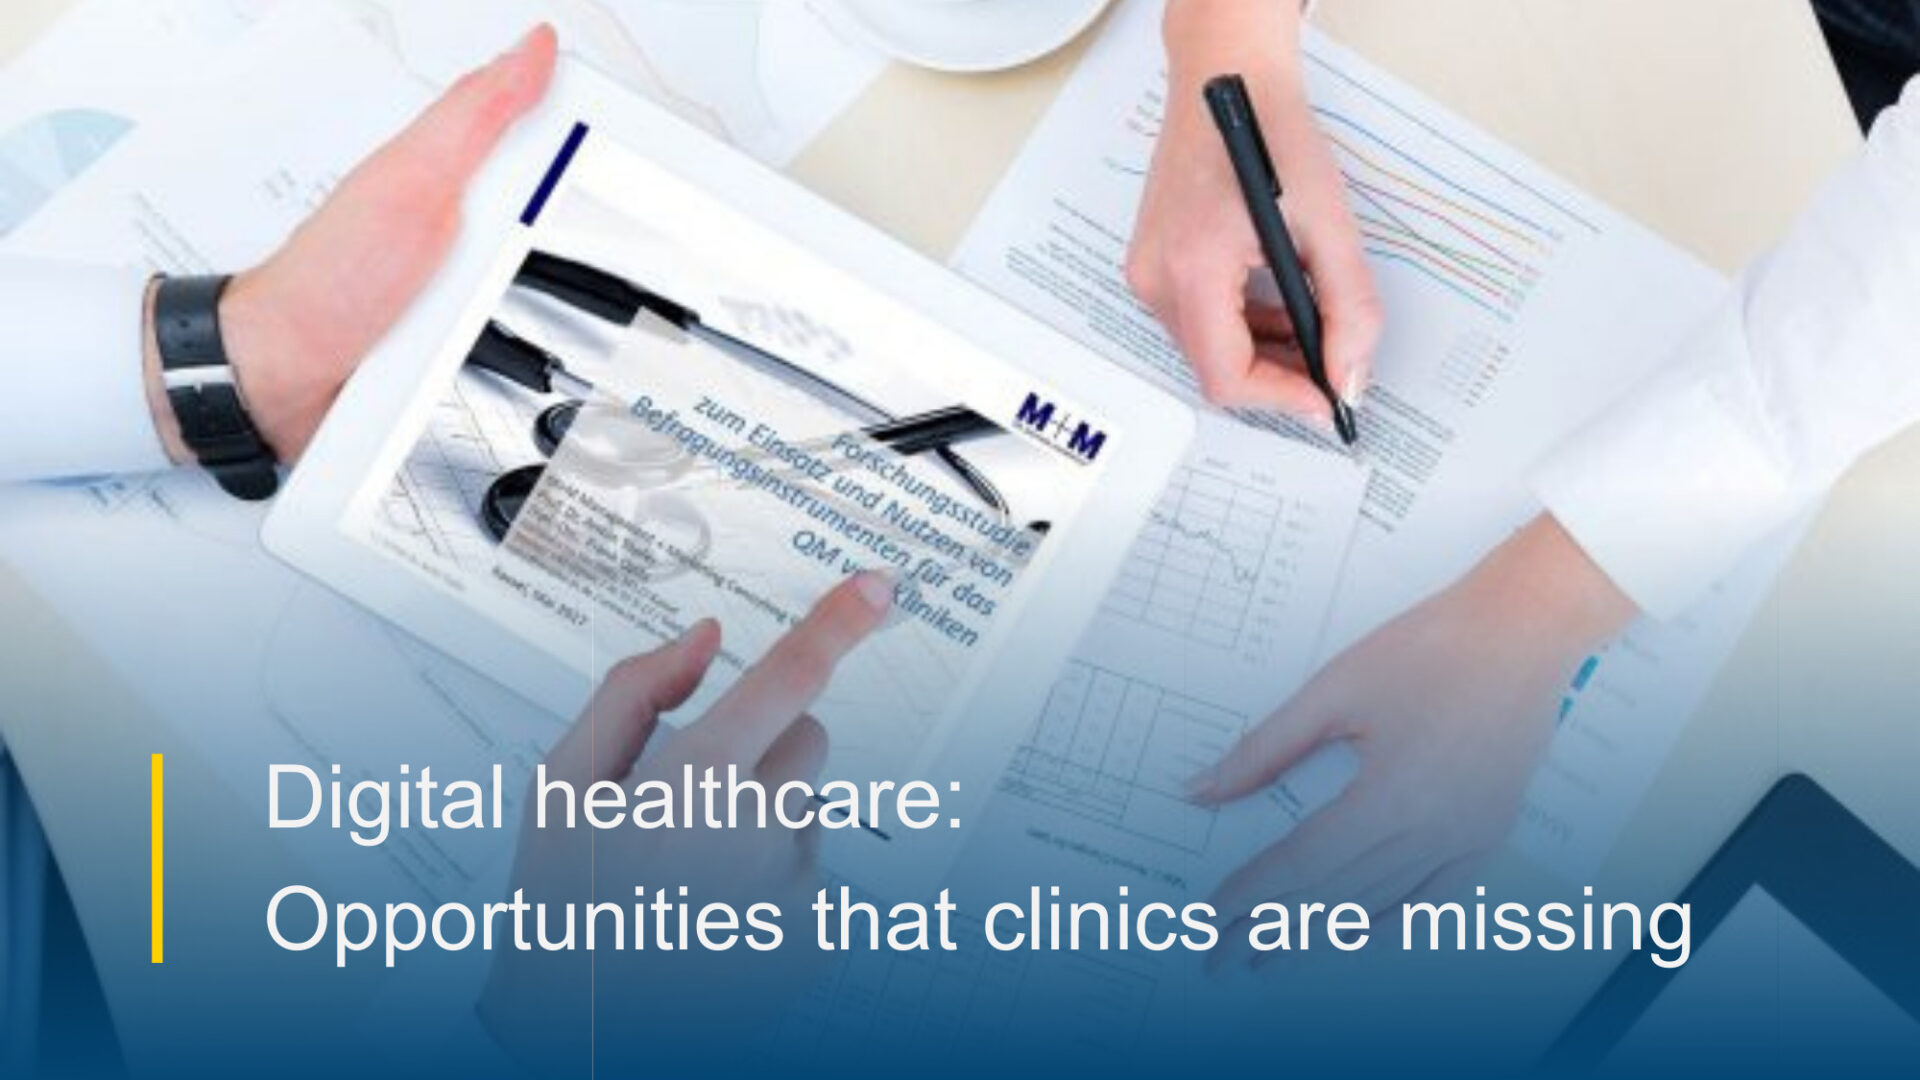 Digital healthcare: missed opportunities for clinics